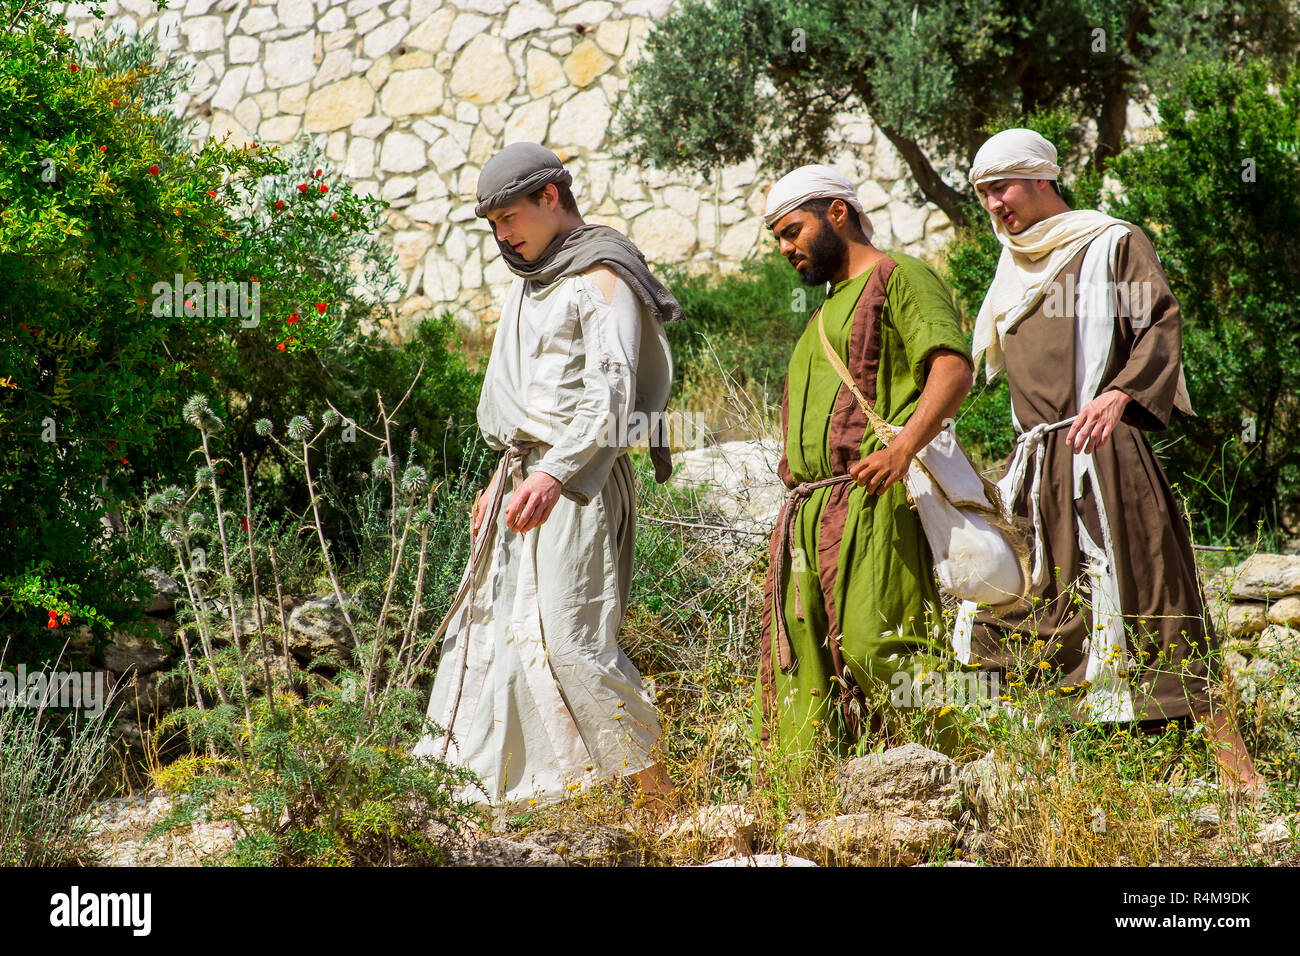 5 May 2018 Young men in period costume in the open air museum of Nazareth Village Israel. This site provides an authentic look at the life and times o Stock Photo